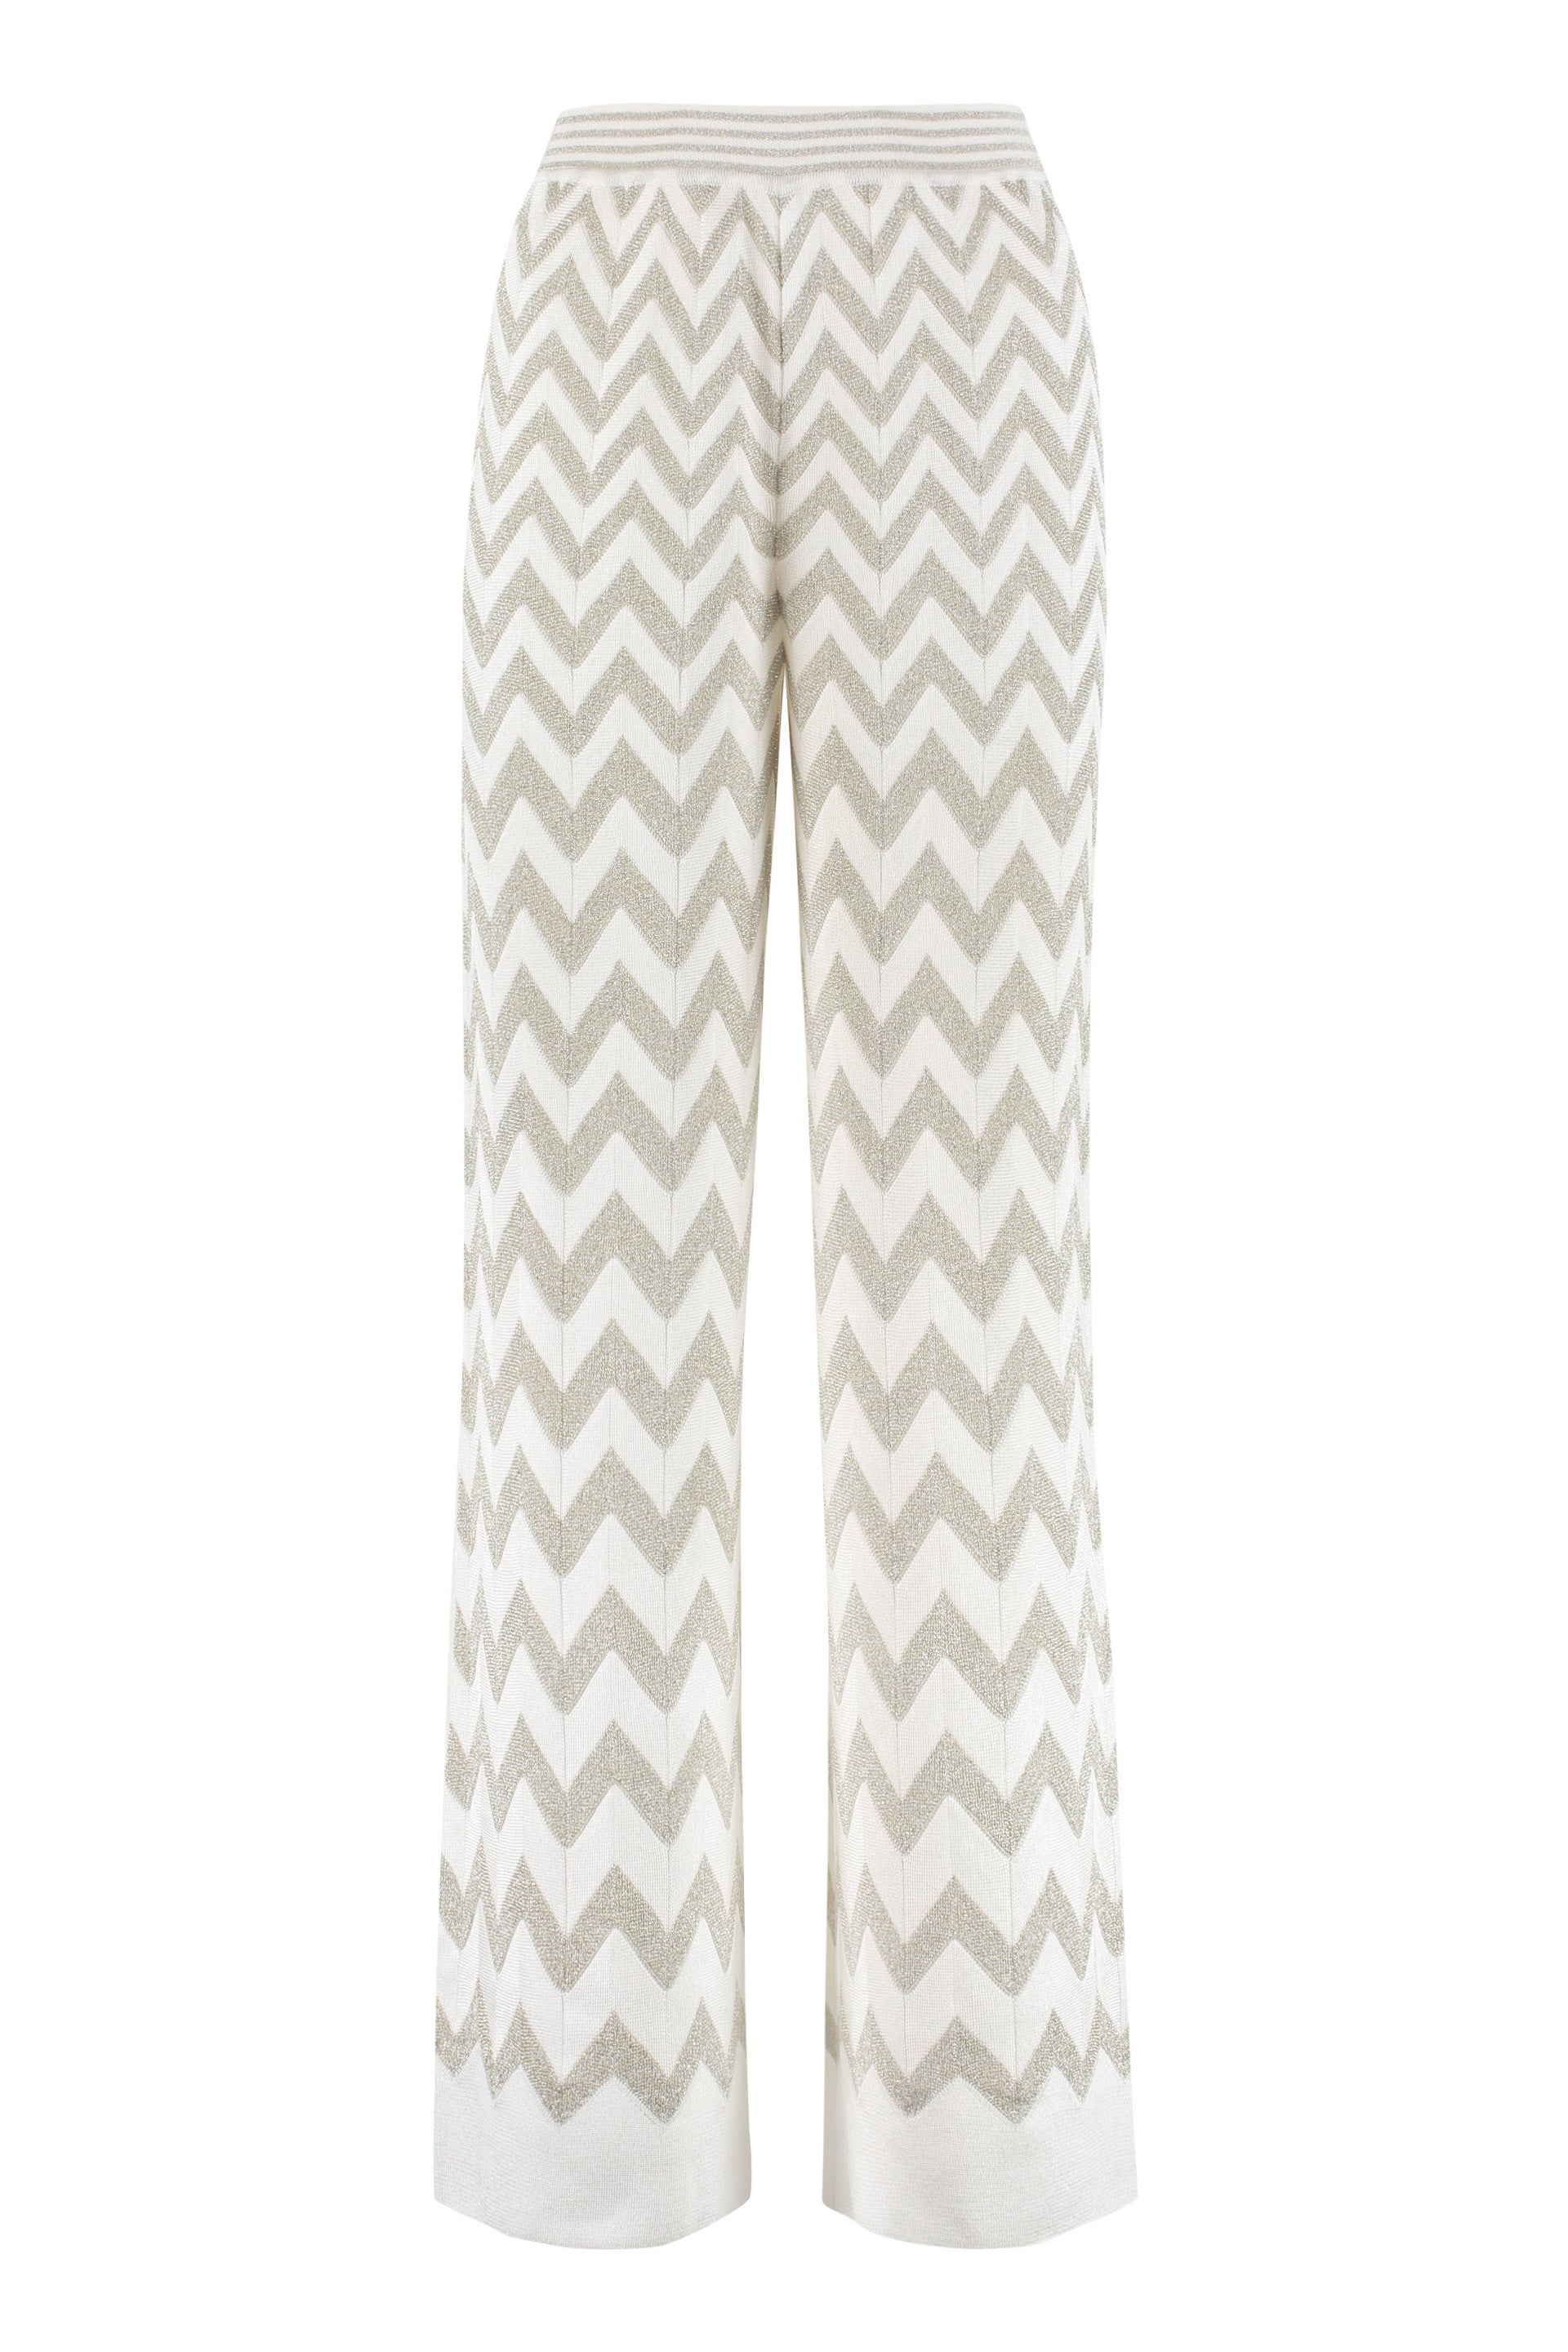 Chevron motif knitted palazzo trousers-Missoni-OUTLET-SALE-44-ARCHIVIST